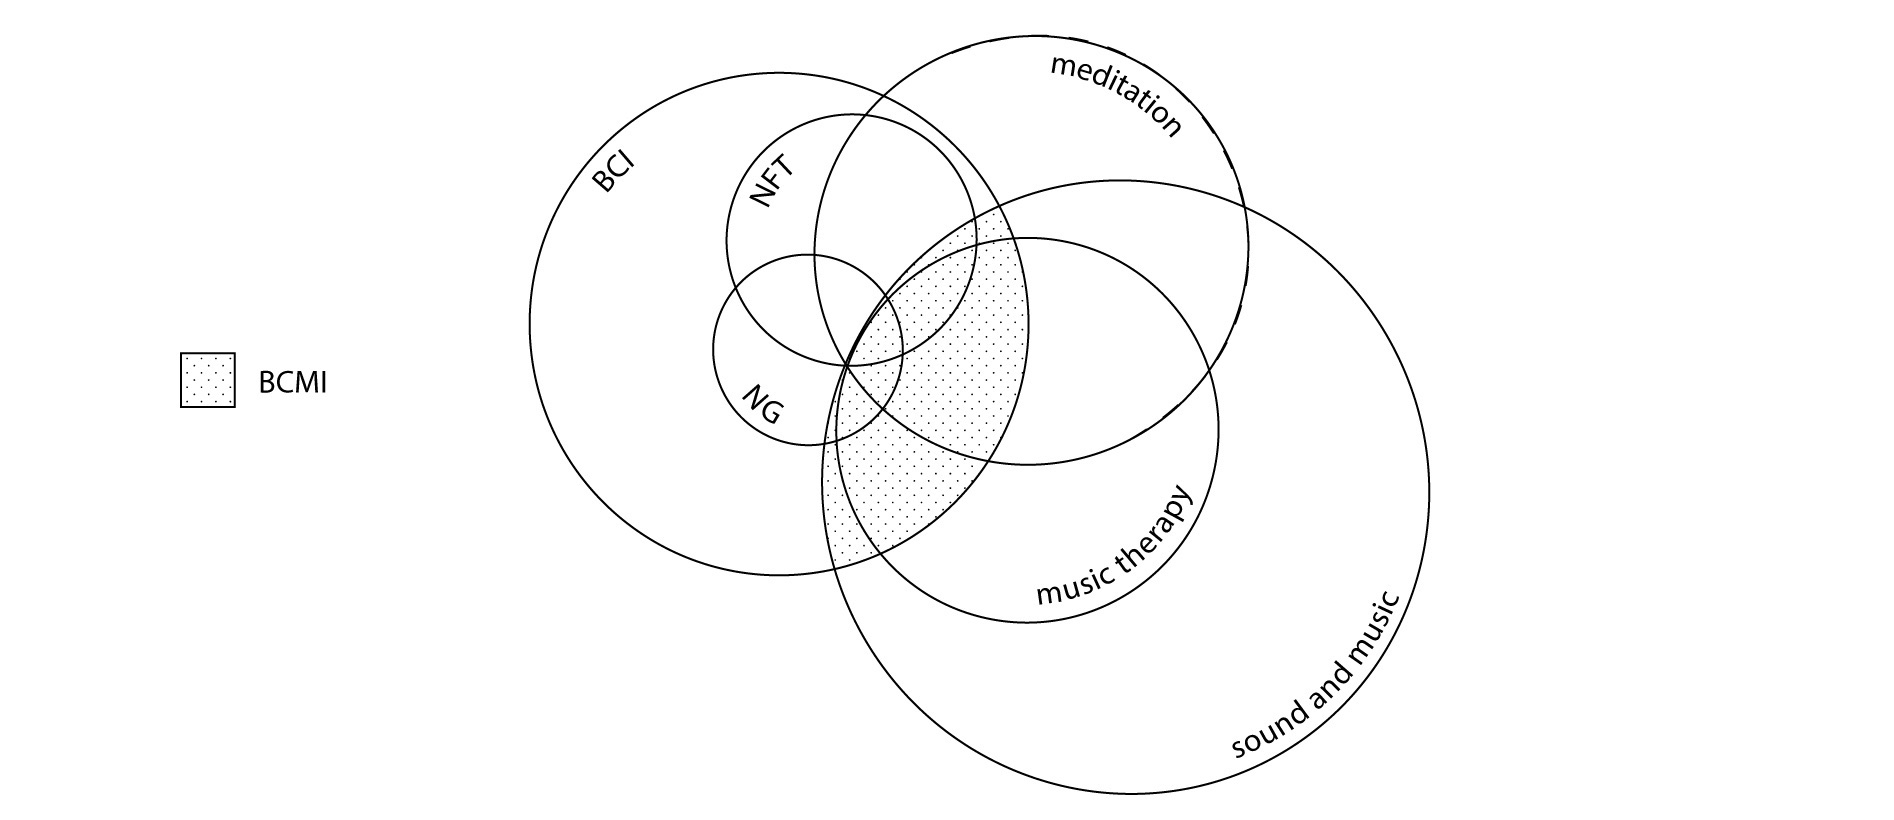 Venn diagram of the intersecting research domains.